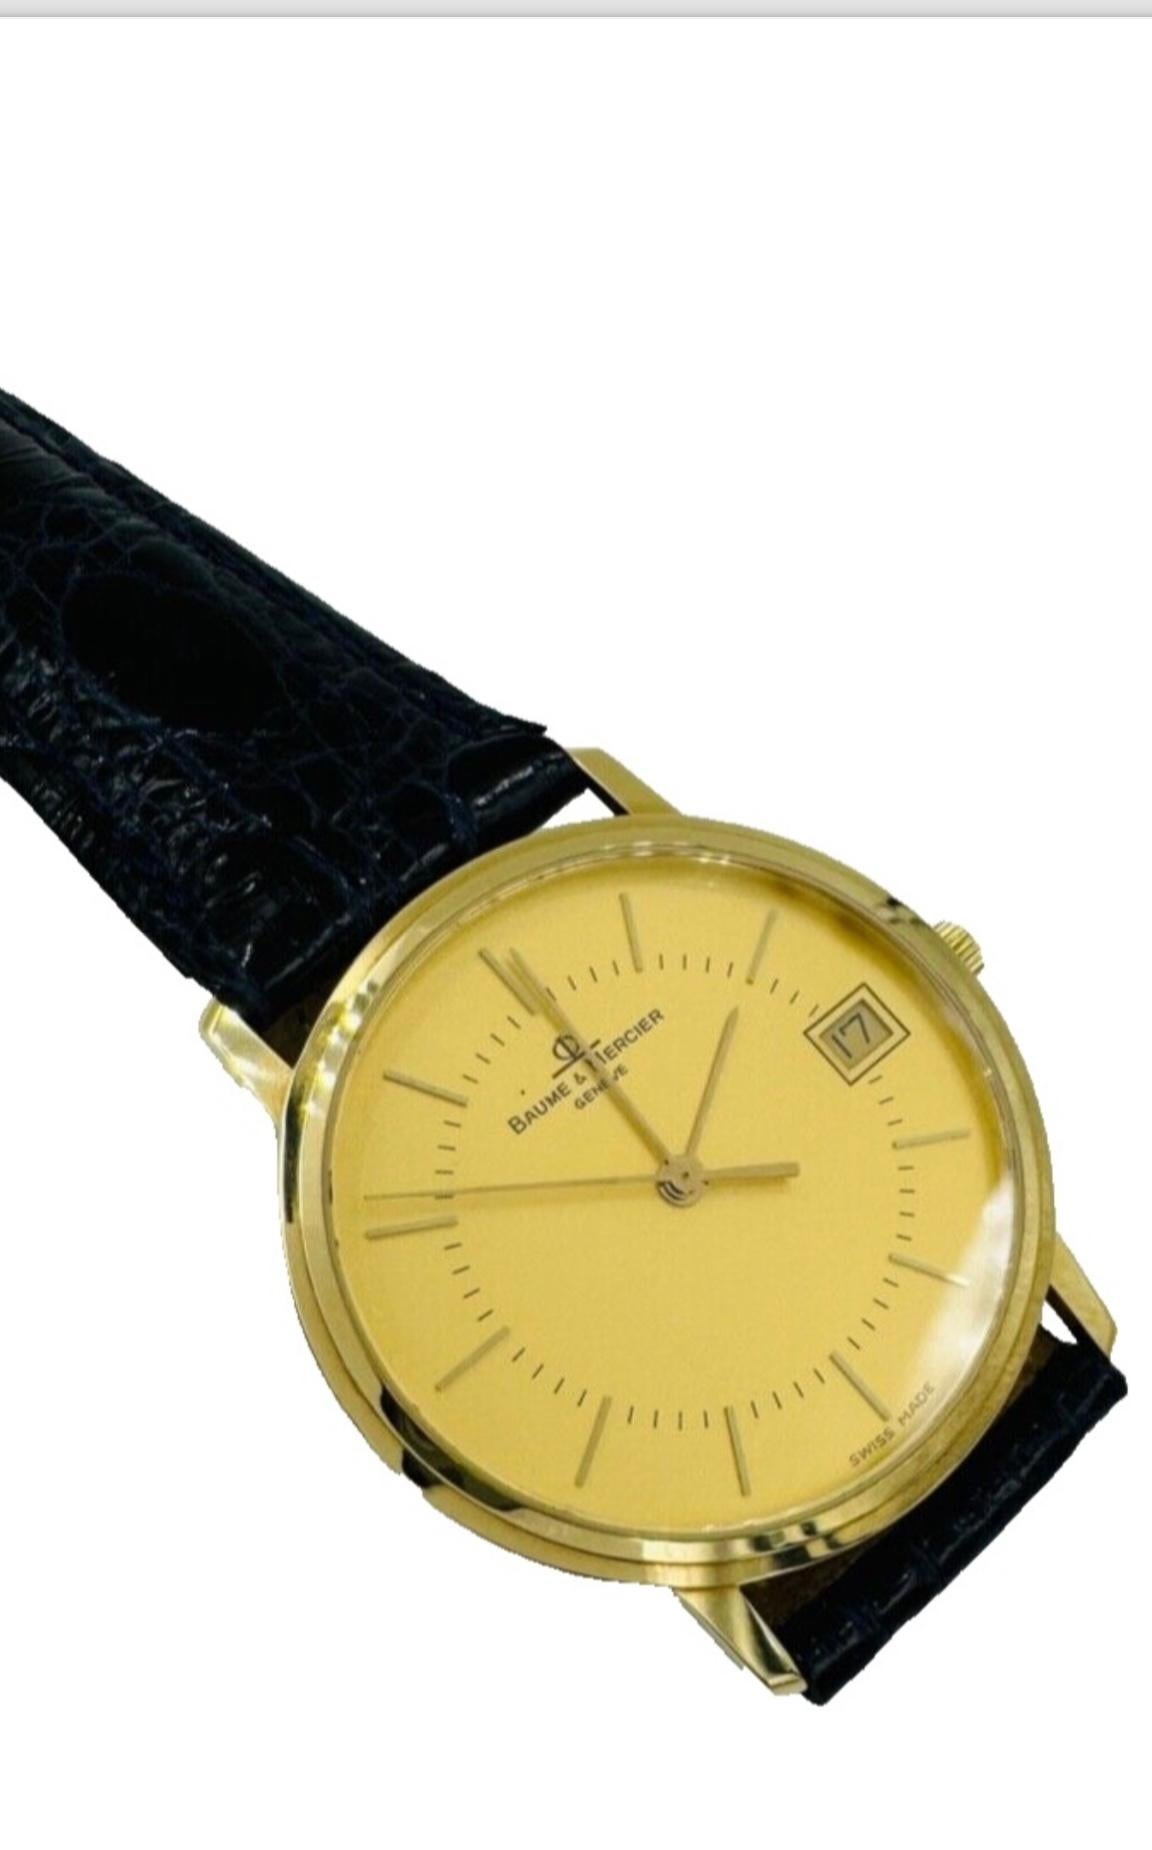 1980s Baume & Mercier Yellow Gold Wristwatch.

  This 1980s Baume & Mercier Yellow Gold Wristwatch is another classic watch from the period. It has a quartz movement with a second hand and a date.  And it has a gold dial that compliments the case